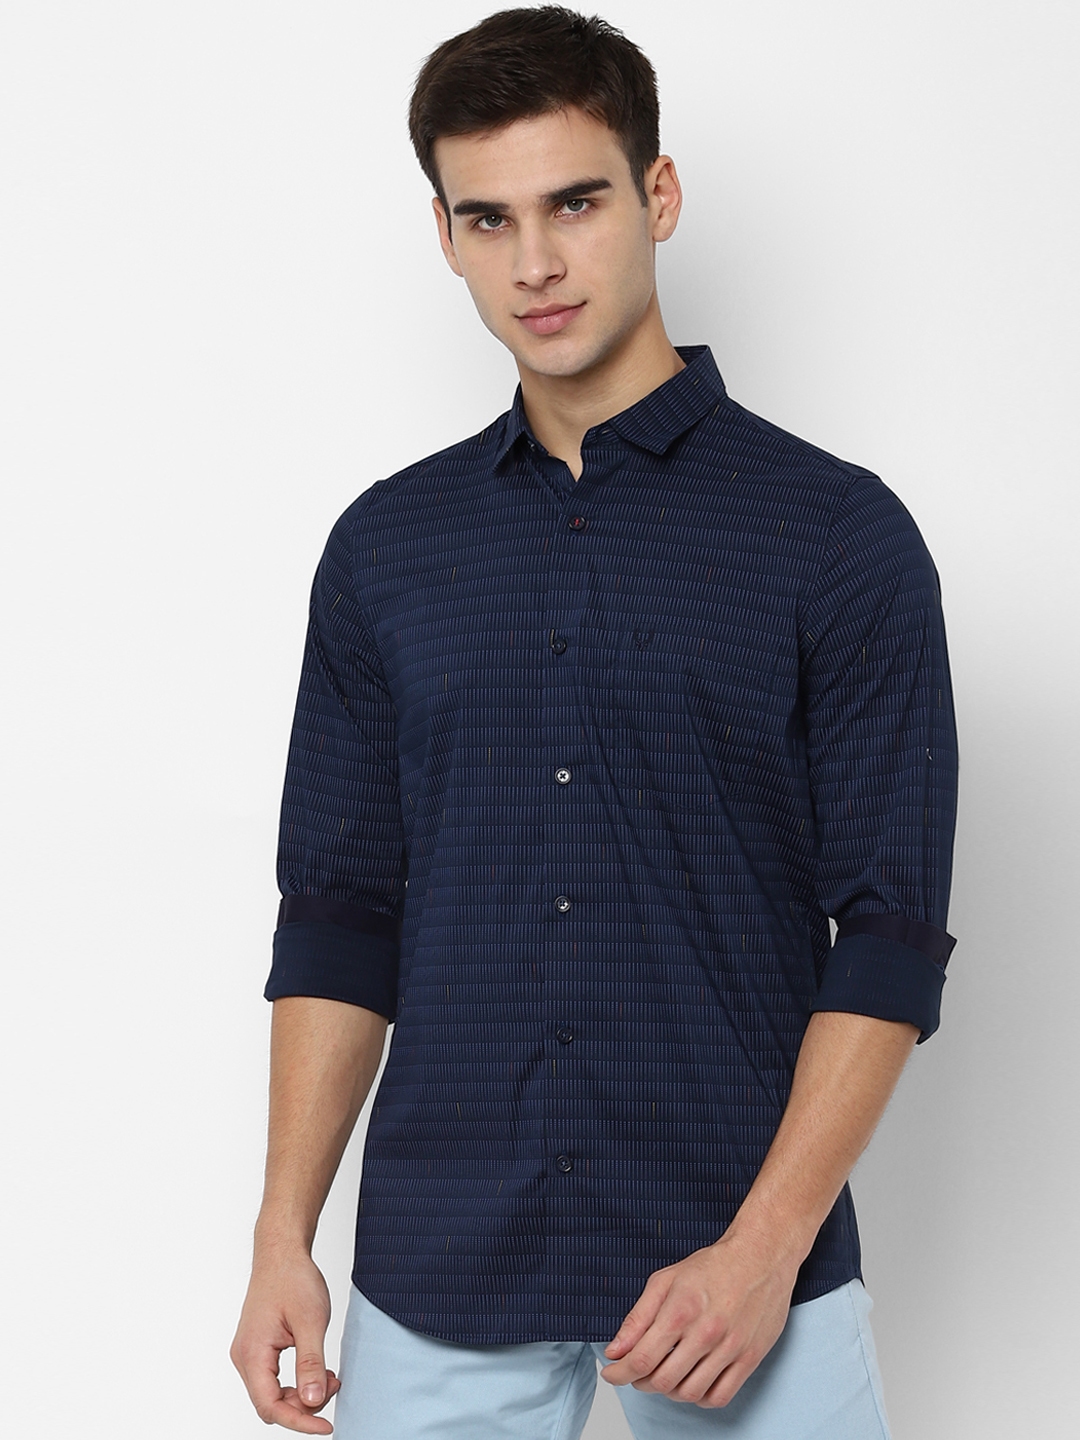 Buy Allen Solly Men Navy Blue Slim Fit Striped Casual Shirt - Shirts ...